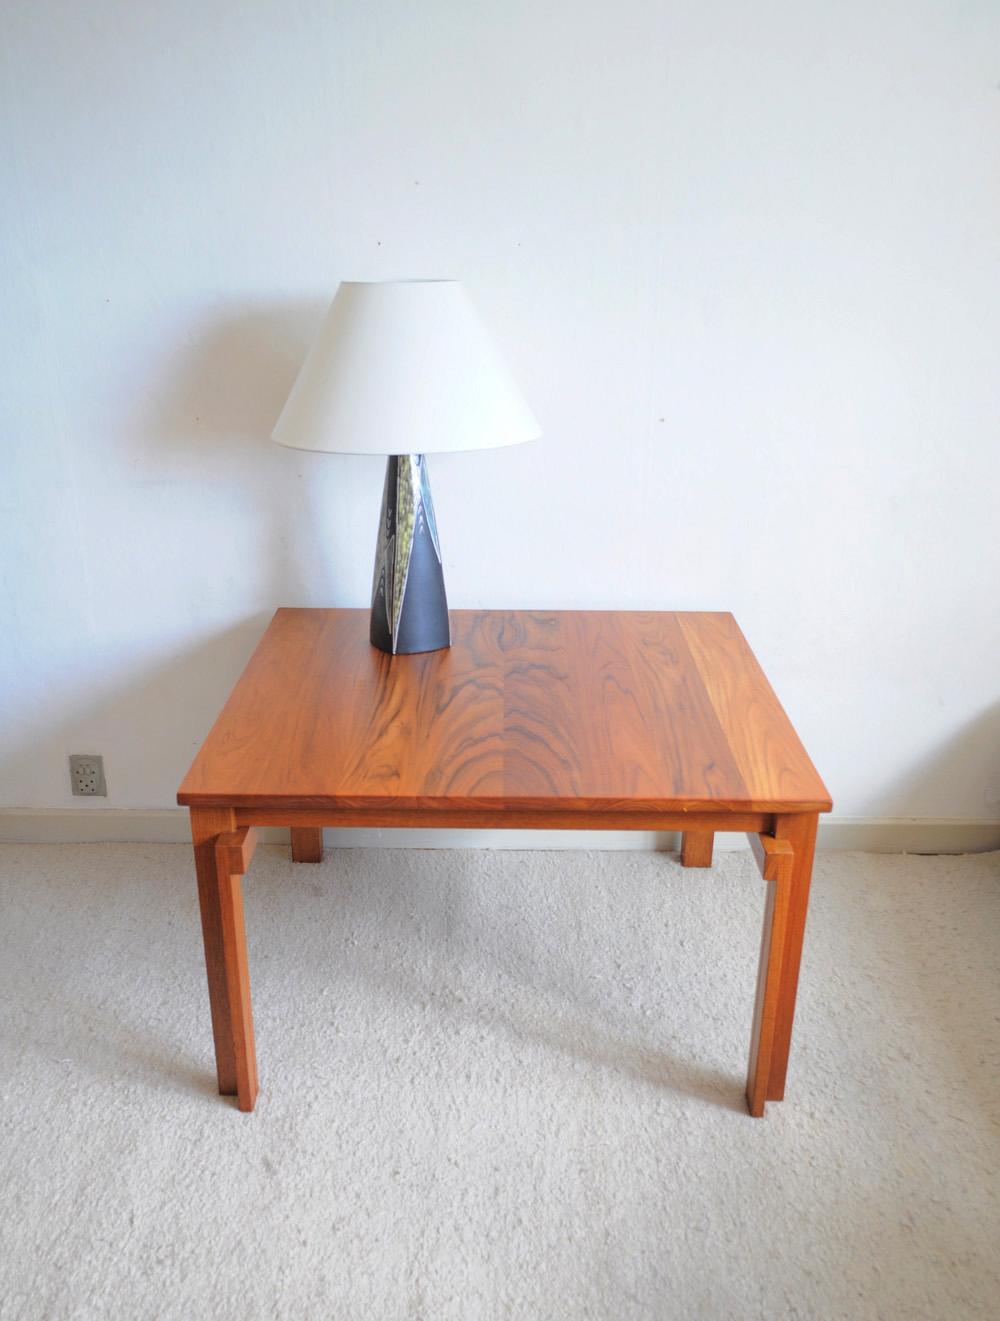 Rare Danish modern coffee or side table in massive golden teak wood. Designed by Inger Klingenberg for France & Søn in the 1960s
Gently refurbished in a very fine condition.
Signs of wear consistent with age and use.
Can be shipped